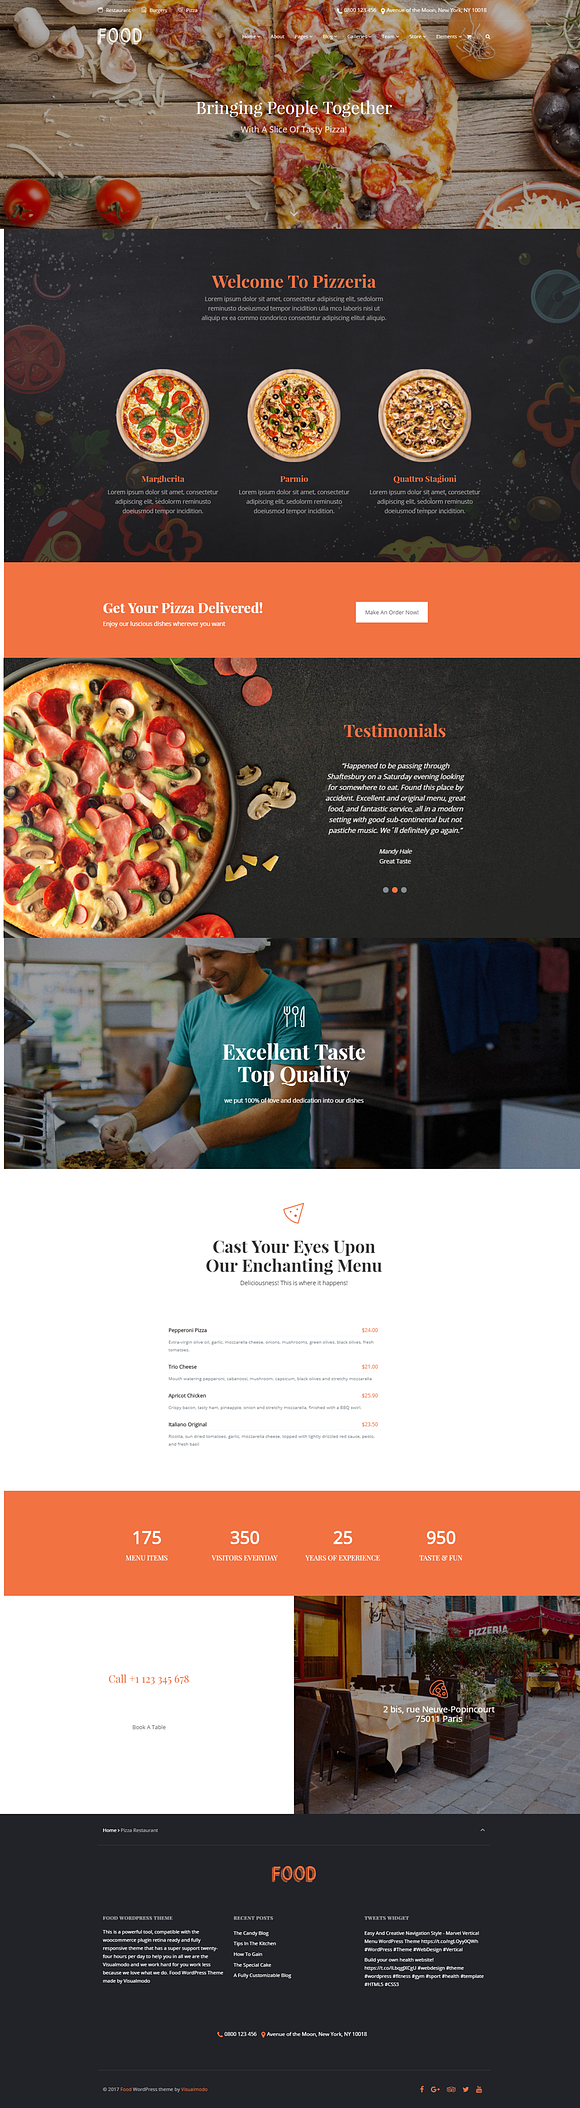 Food - Restaurant WordPress Theme in WordPress Business Themes - product preview 10